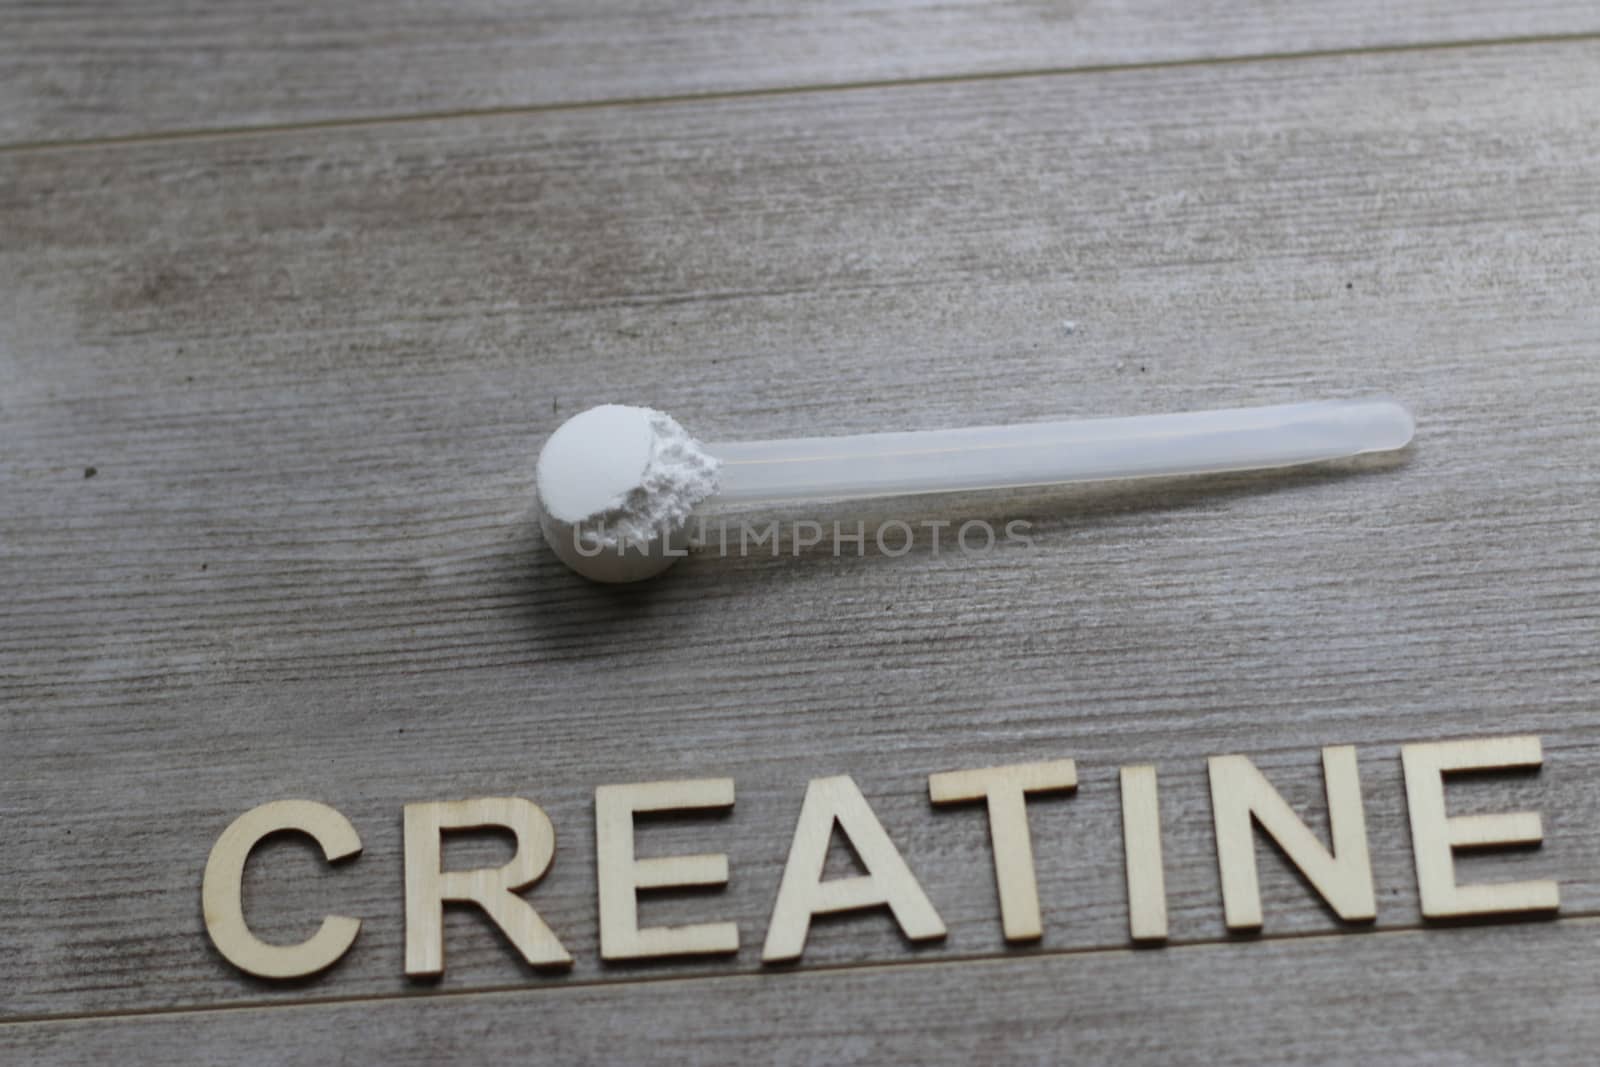 creatine themed images with lots of room for copy space. sports, workout and fitness theme. High quality photo